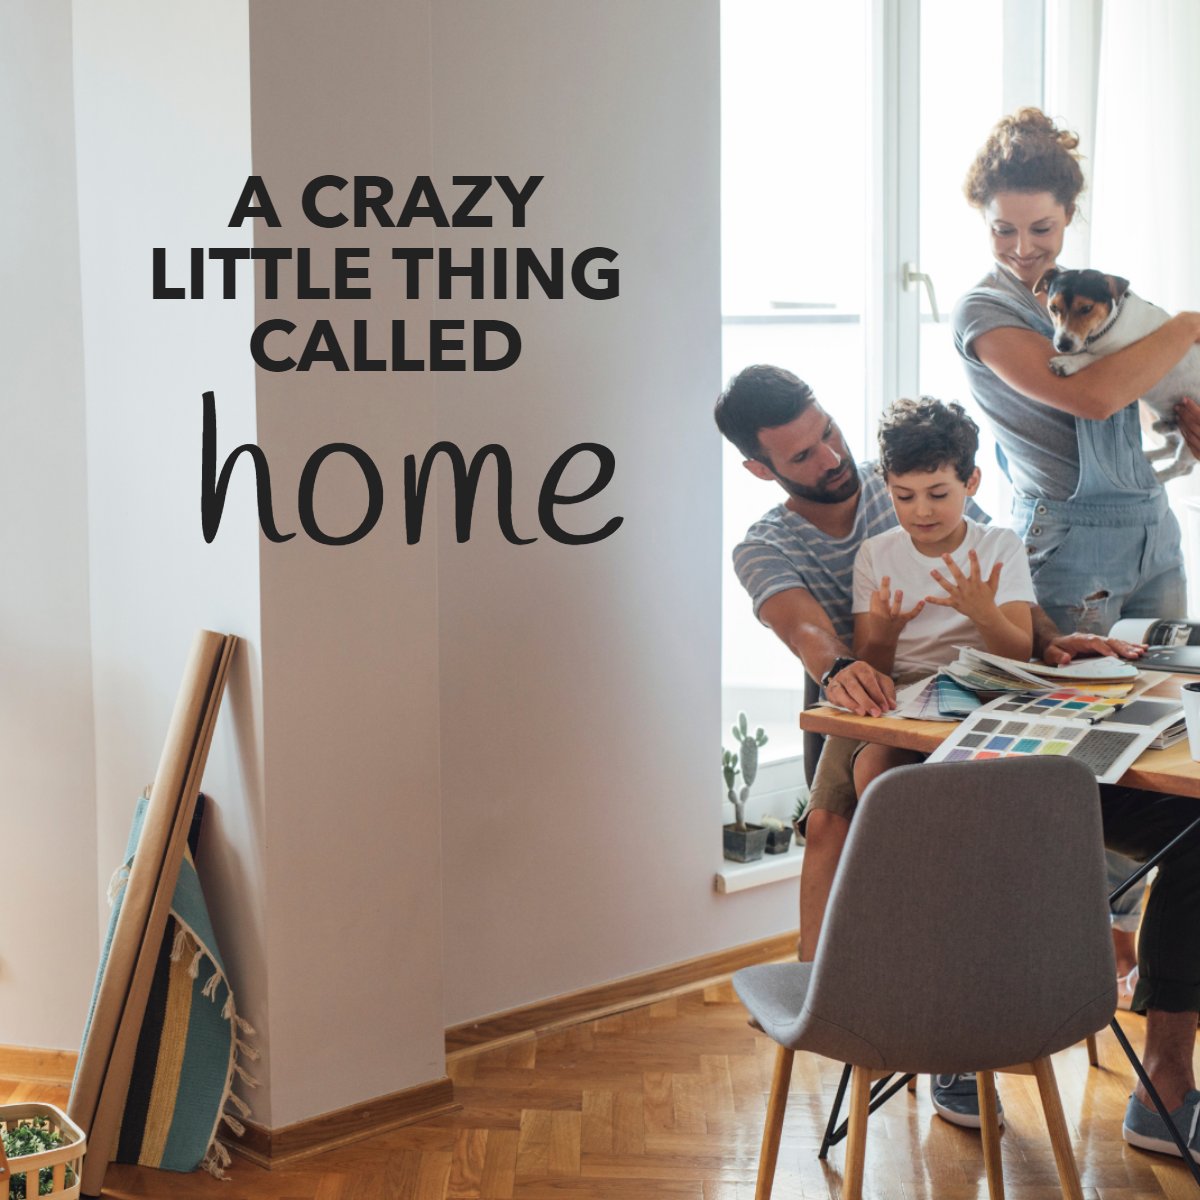 Home is wherever we are with our loved ones. ❤️

#home    #family    #lovedones    #love
#realtynewengland #mannymenezesgroup #realtyne #wesellnewengland #welovenewengland #ilovenewengland #massrealestate #rirealestate #nhrealestate #ctrealestate #wesellhomes